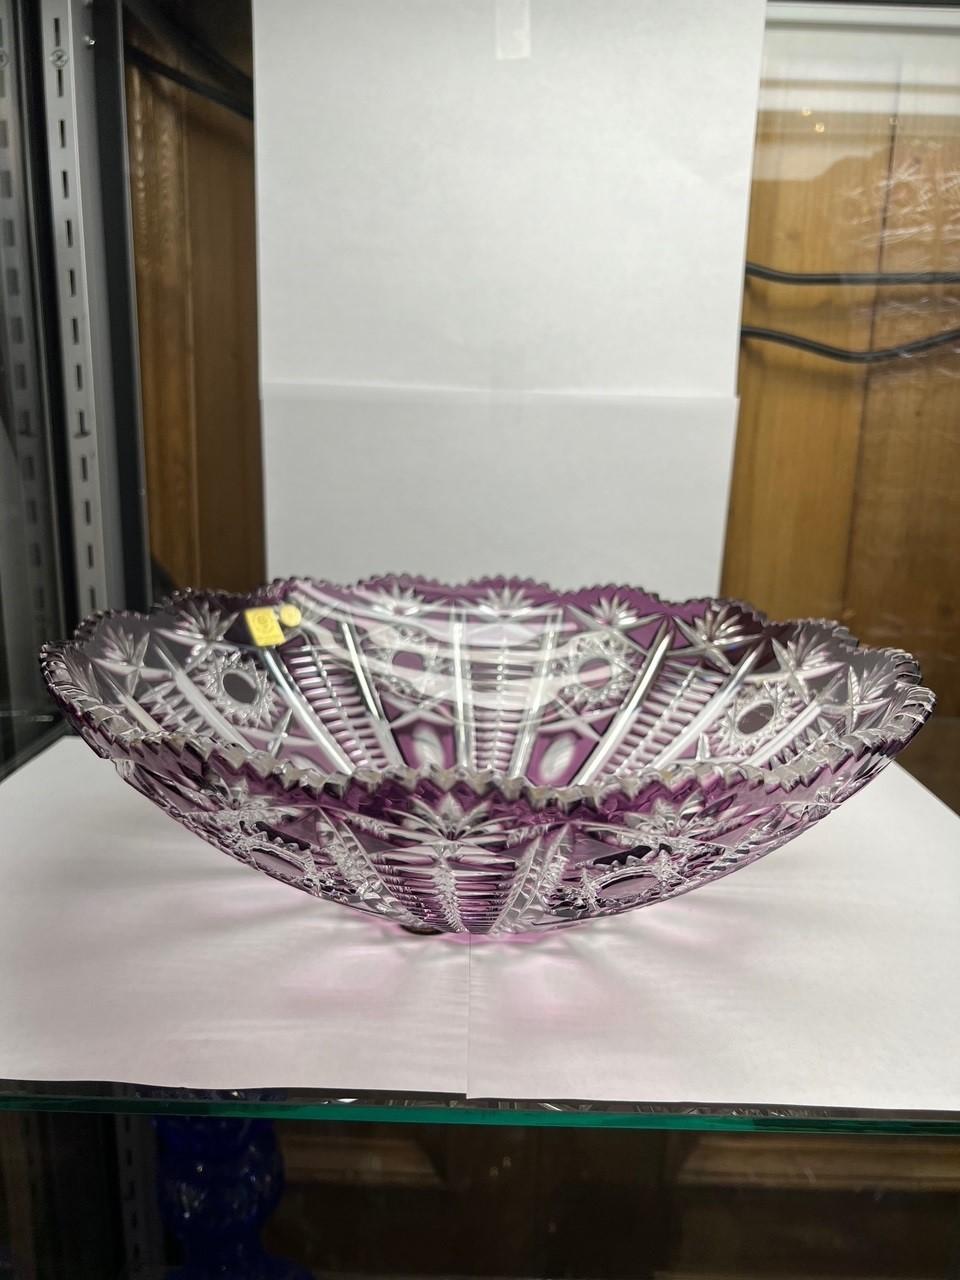 Stunning hand cut lead crystal low bowl created as a work of art by the hands of the finest Czech glass workers. The Caesar Crystal Company in the Czech Republic has been selling hand cut lead crystal pieces since 1861 and is known as one of the